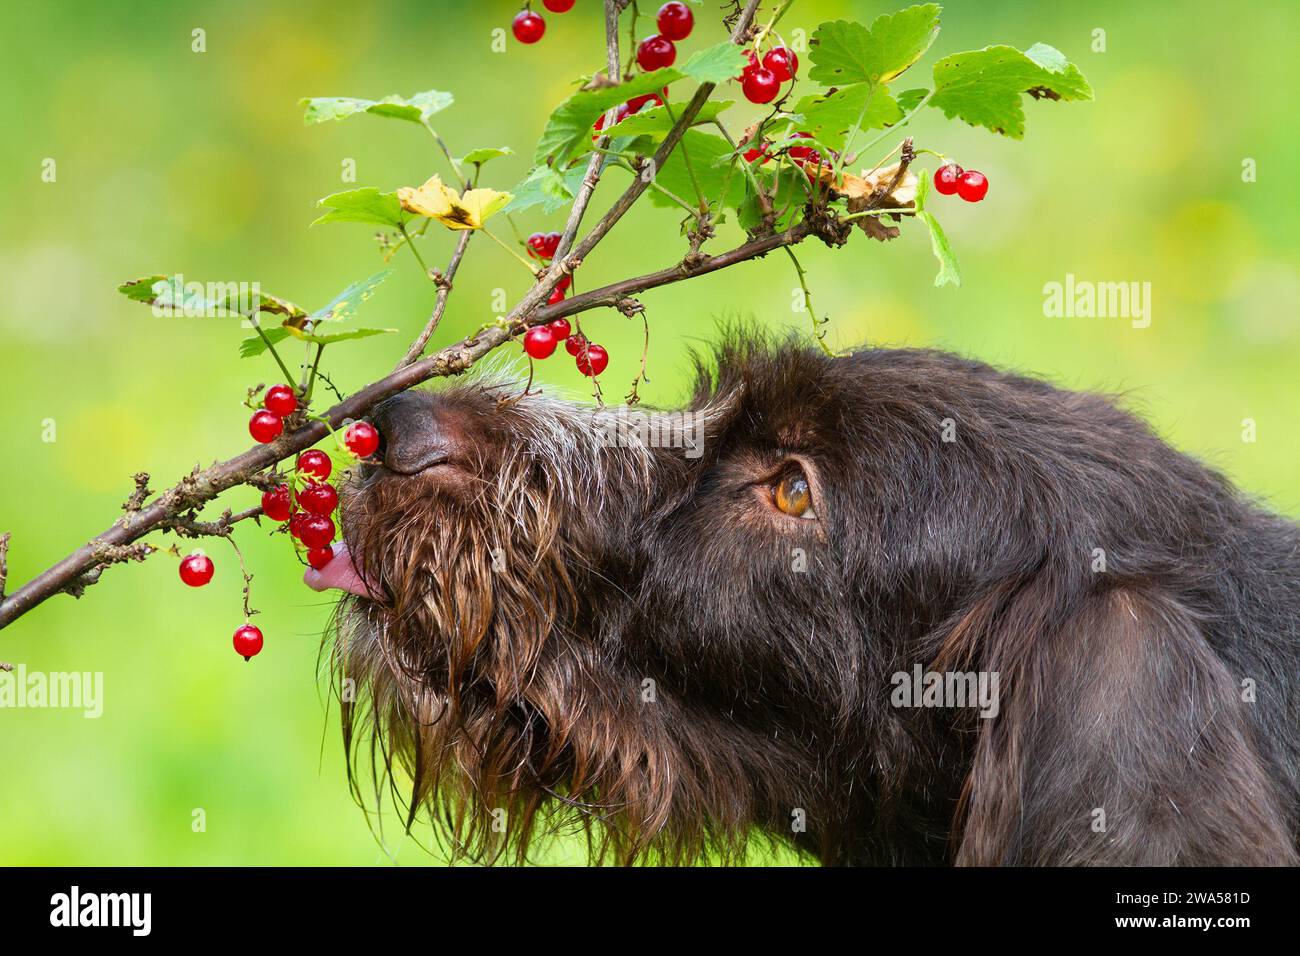 The dog eats red currant berries directly from the branch. The tip of the tongue touches the berries. Close-up. Stock Photo